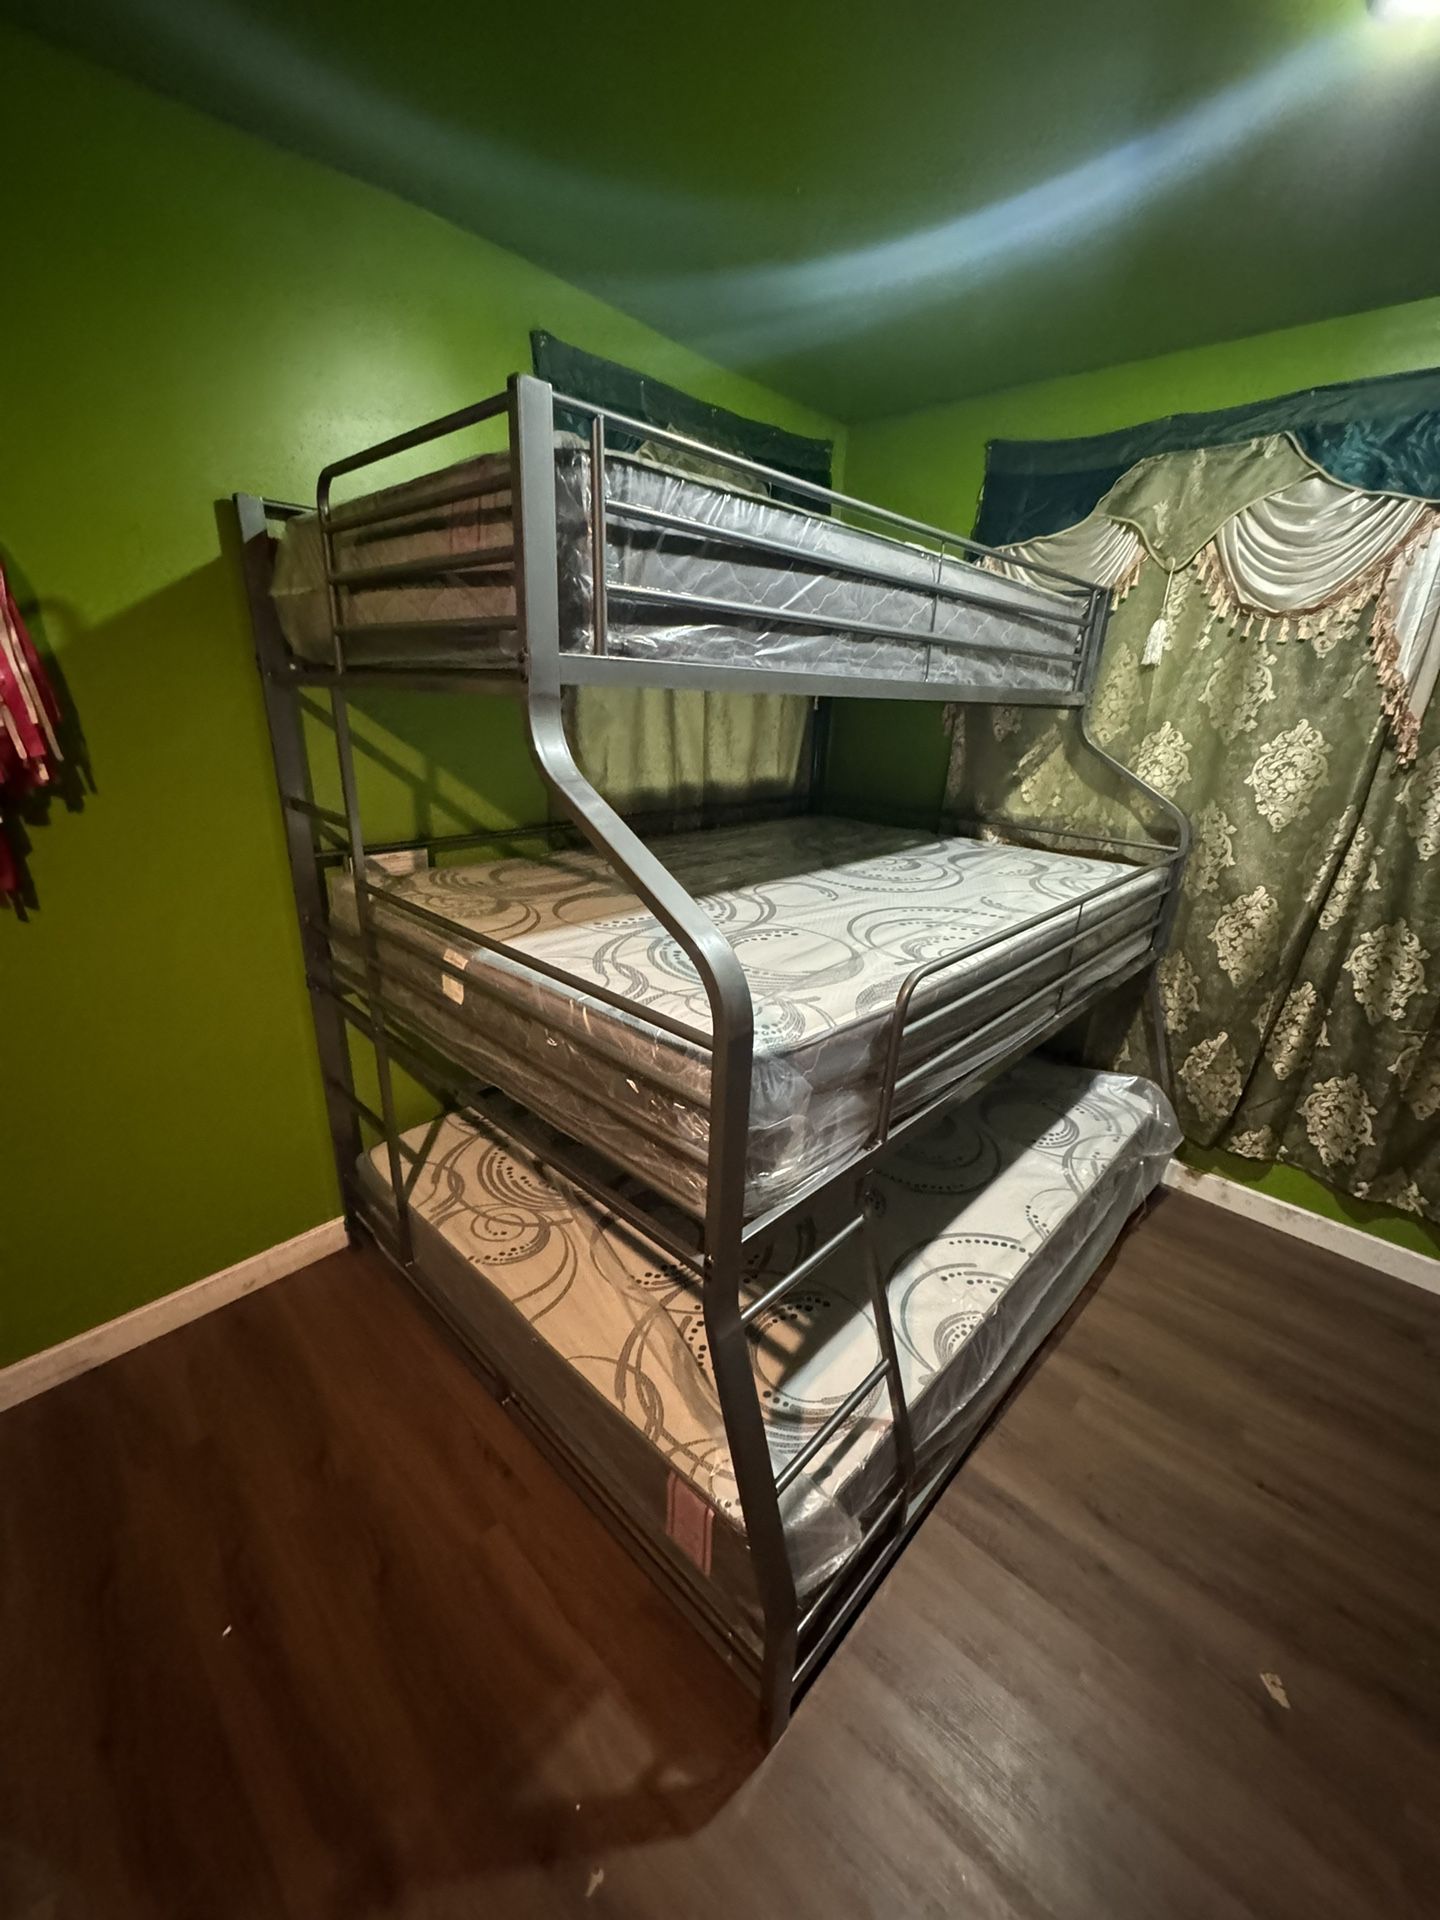 New Triple Bunk Bed Metal Twin, Full, Queen Mattresses Included